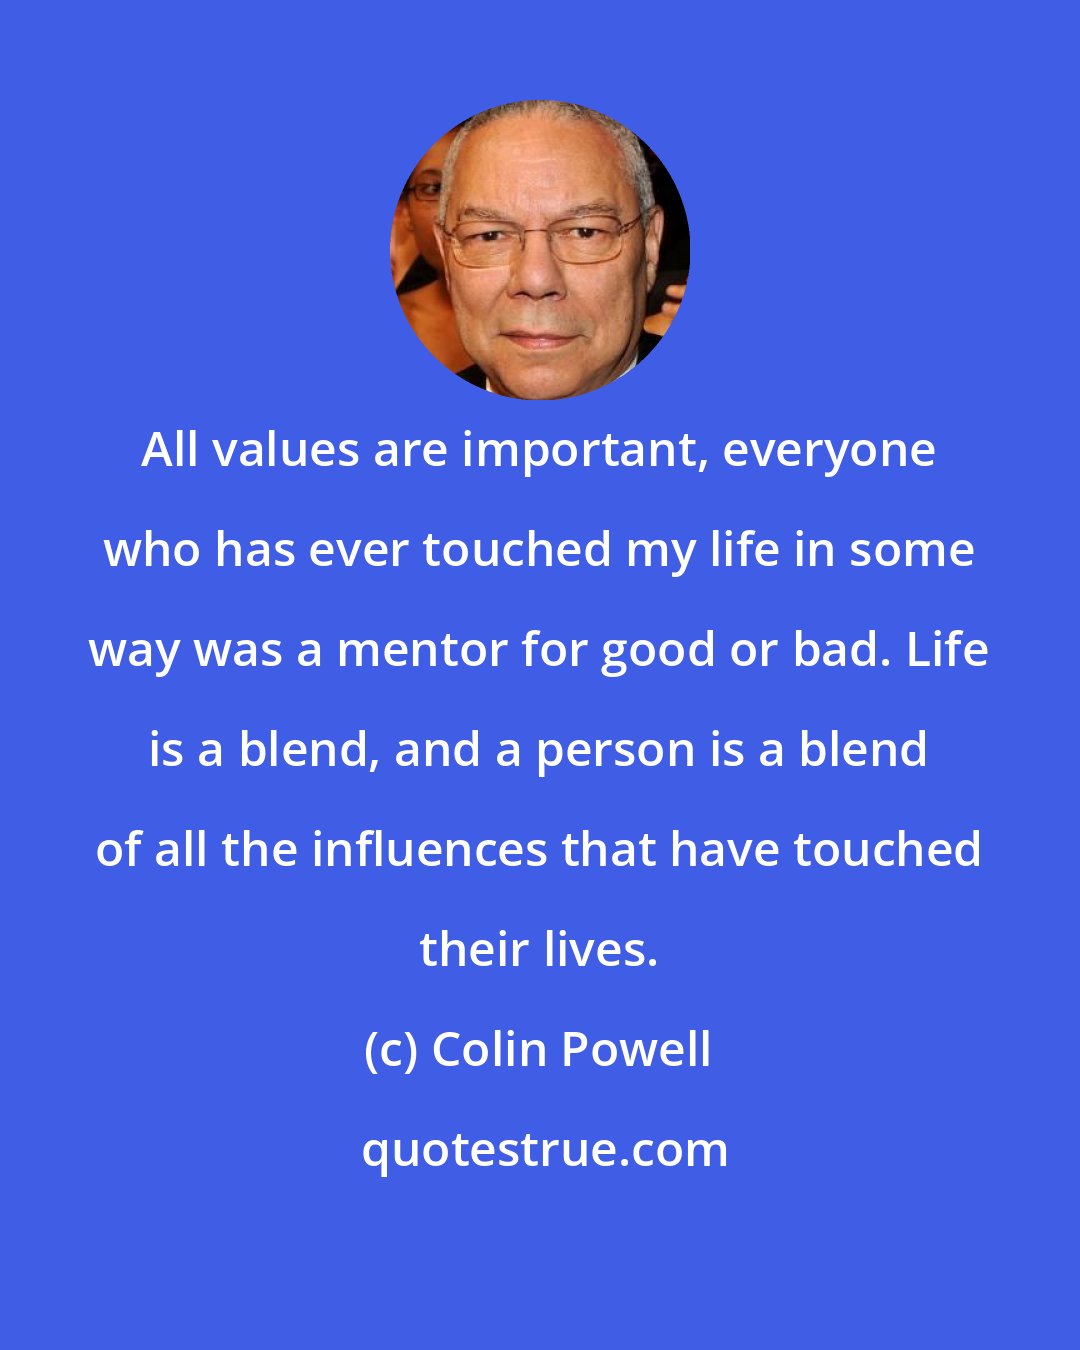 Colin Powell: All values are important, everyone who has ever touched my life in some way was a mentor for good or bad. Life is a blend, and a person is a blend of all the influences that have touched their lives.